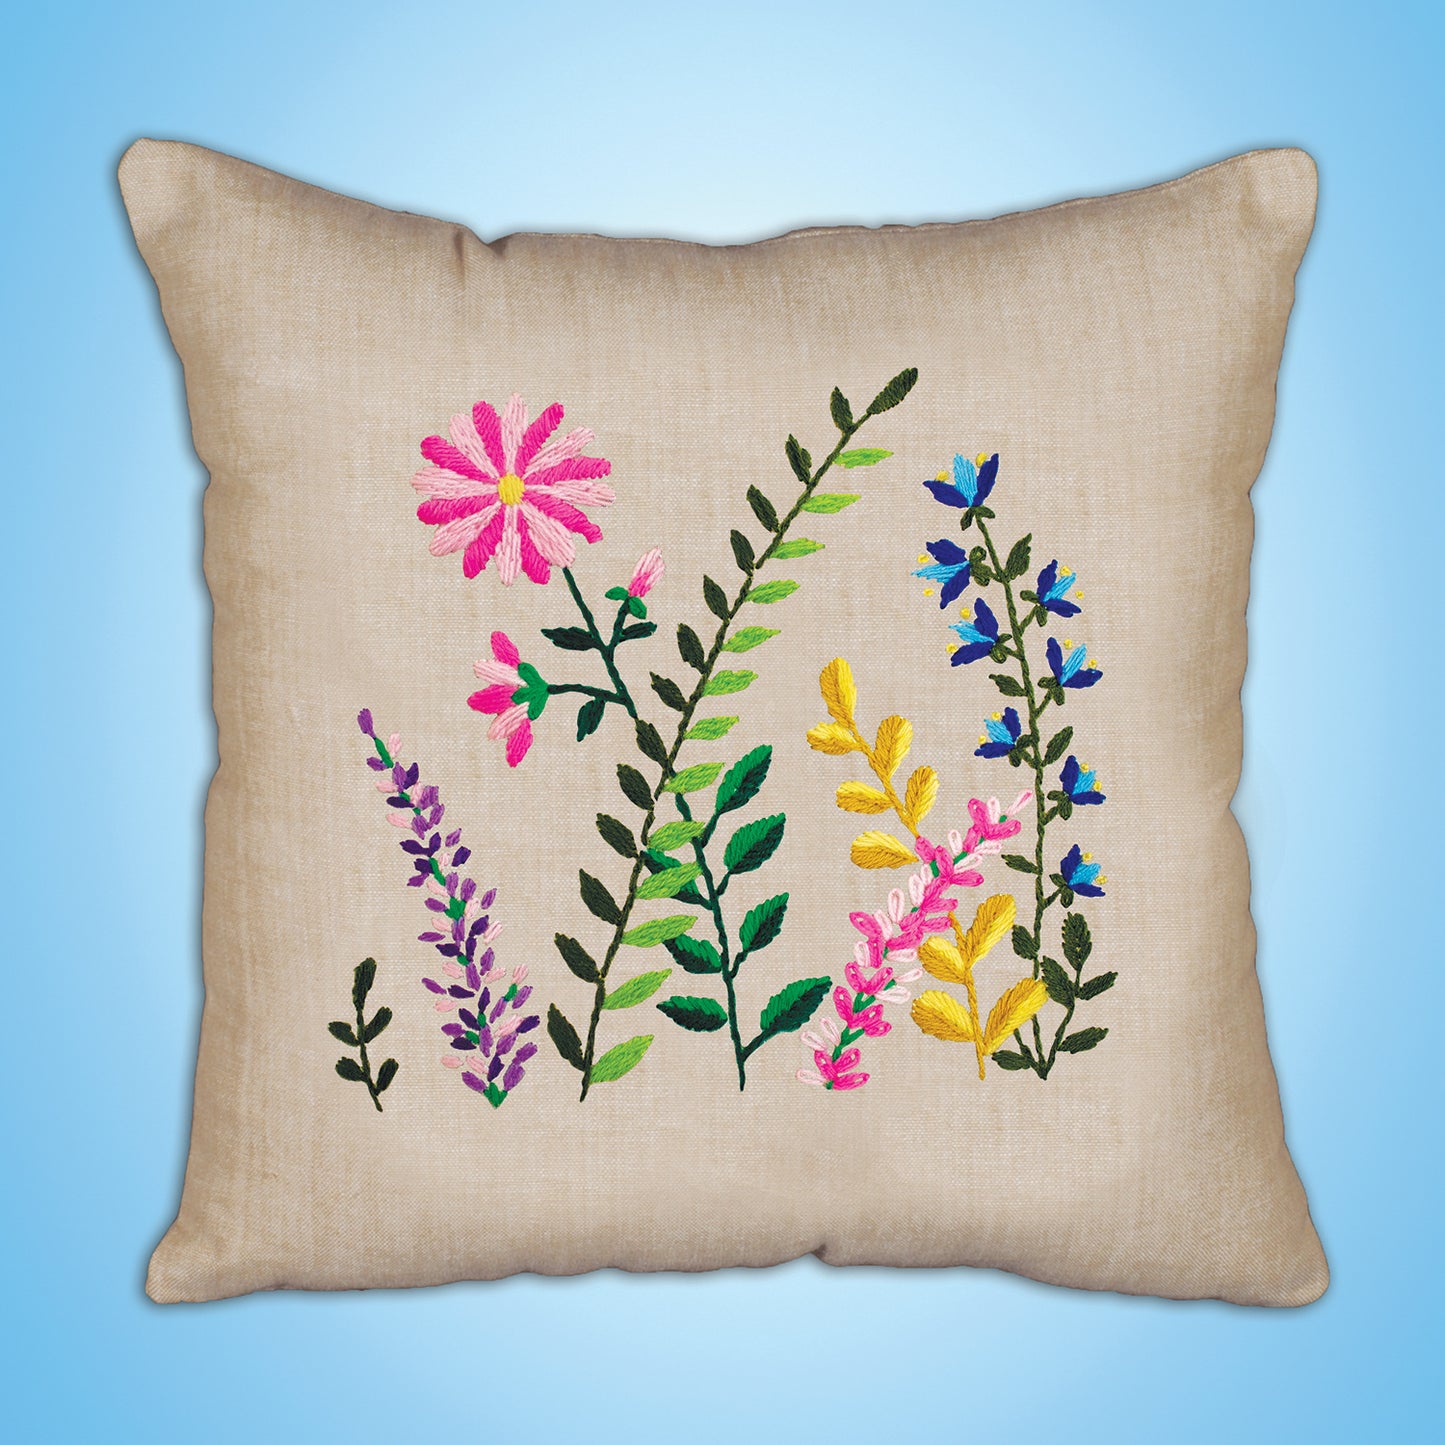 Wildflowers Crewel Embroidery Pillow Kit Primary Image